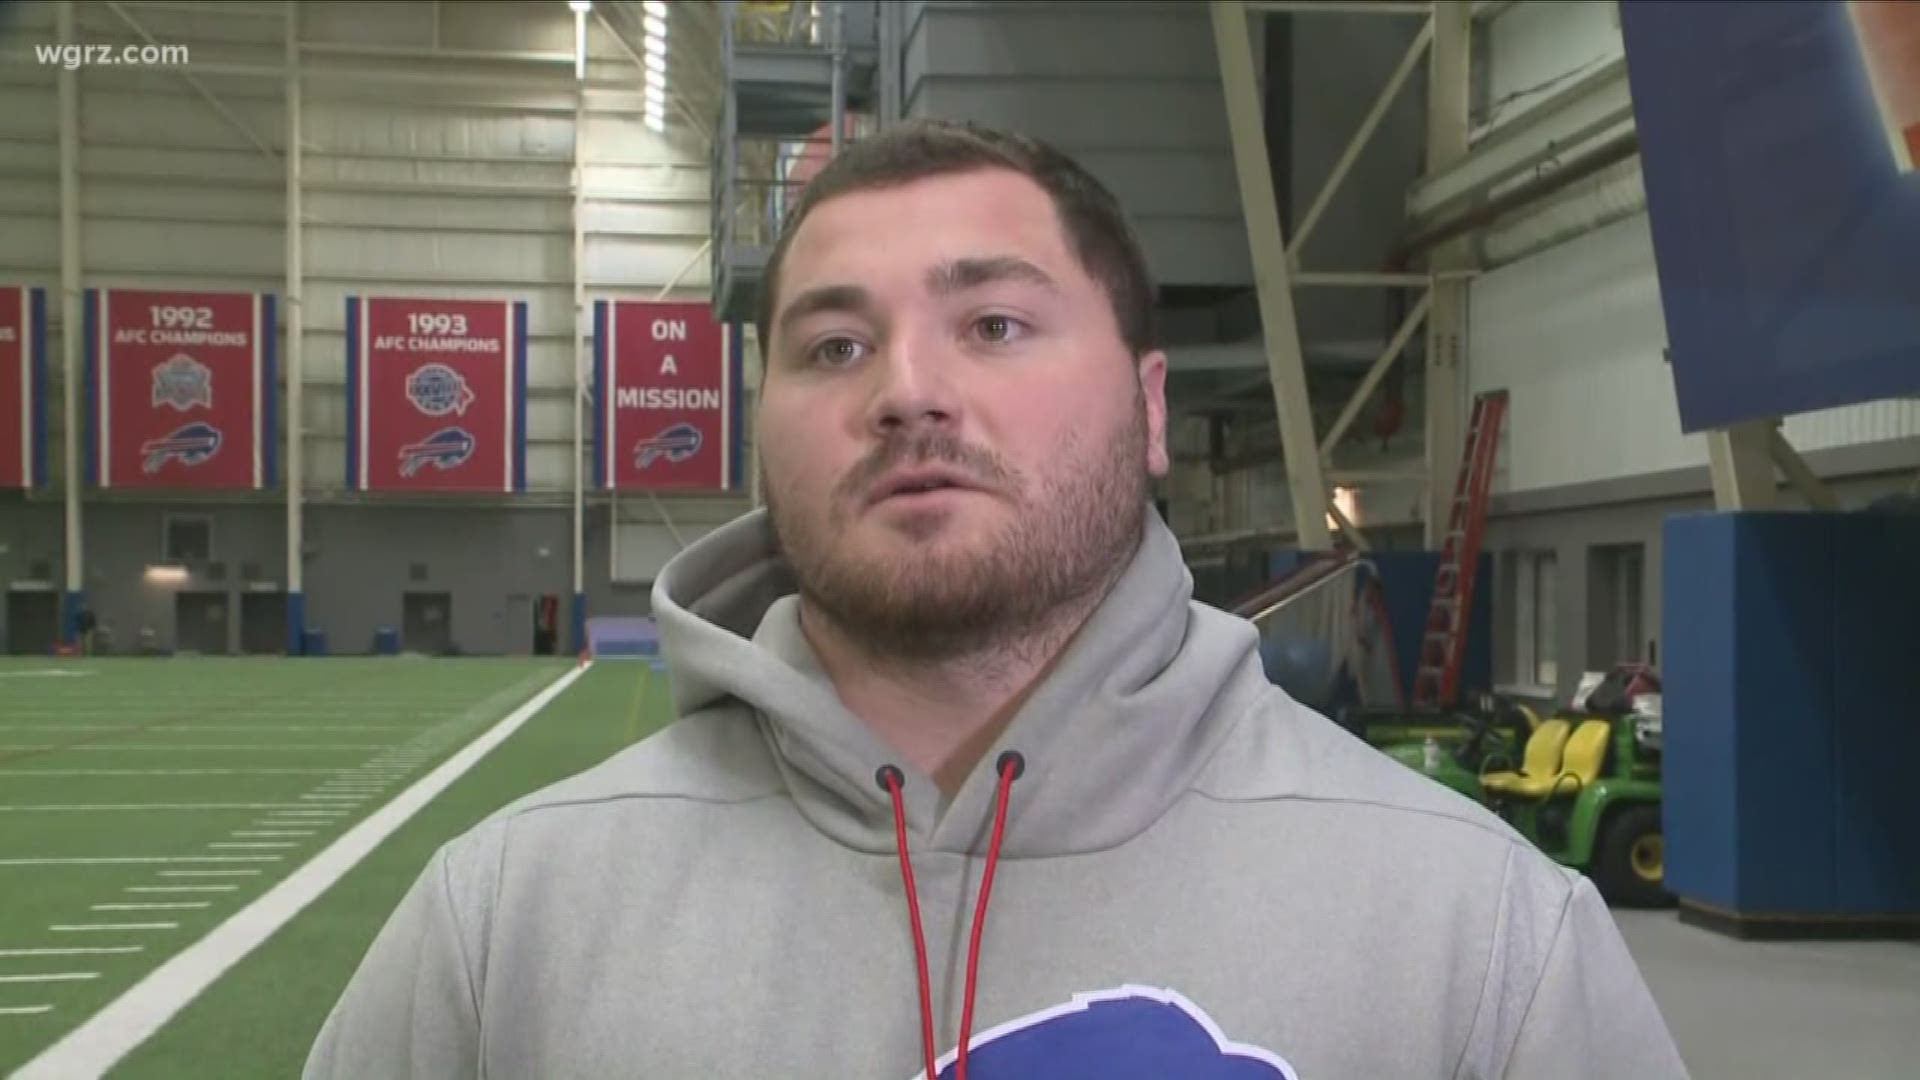 HARRISON PHILLIPS WAS THE PLAYER WHOSE NAME EZRA CALLED AT THE DRAFT IN DALLAS LAST YEAR...